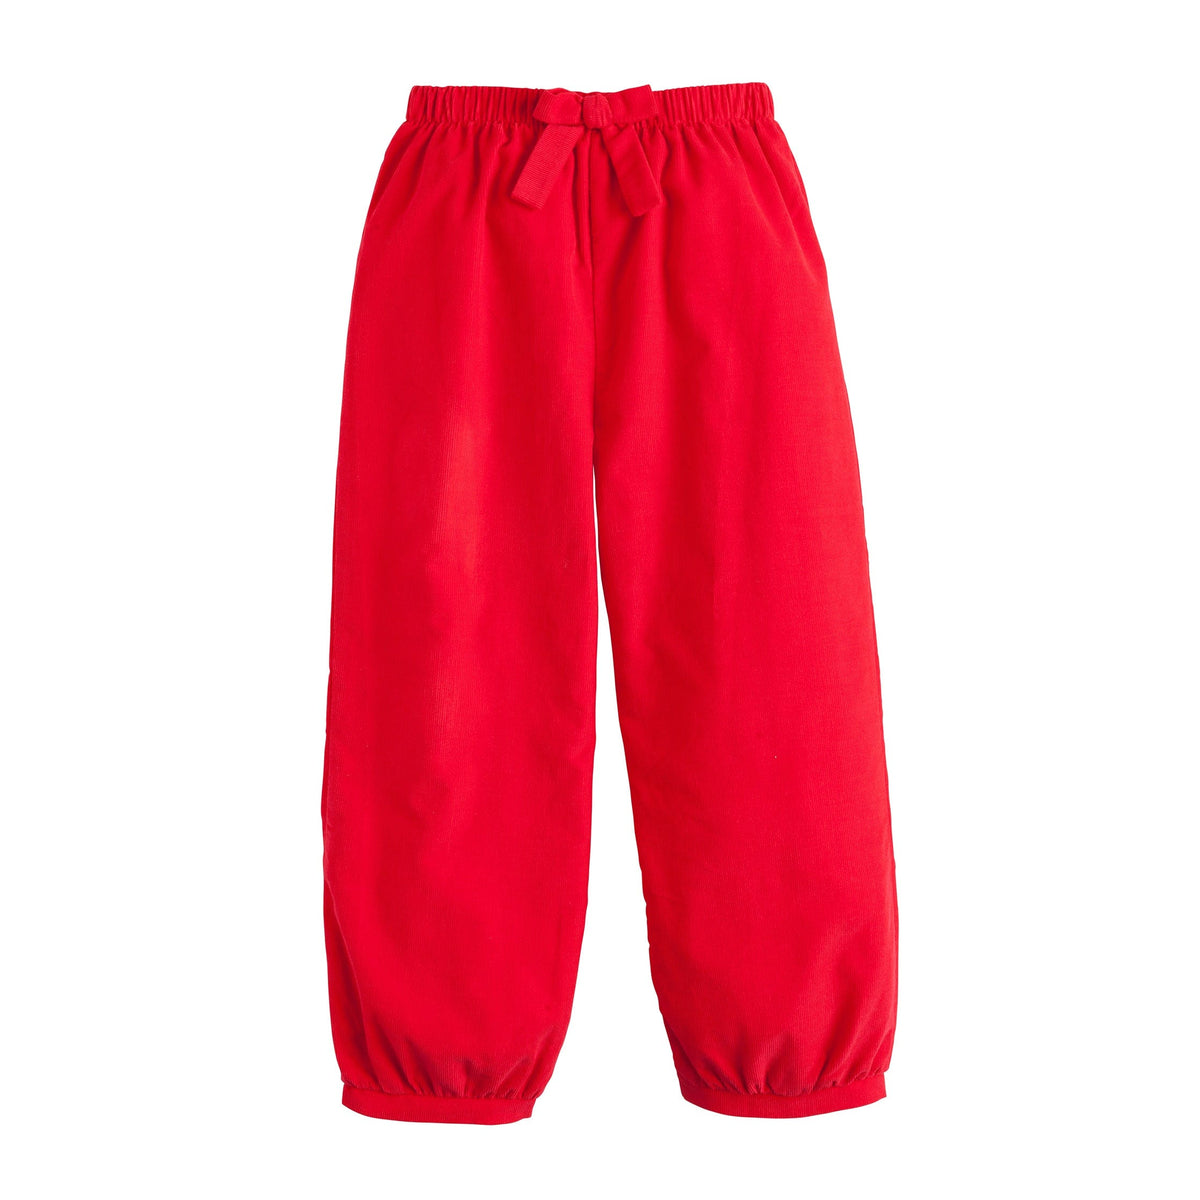 seguridadindustrialcr classic childrens clothing girls red corduroy pull on pant with bow